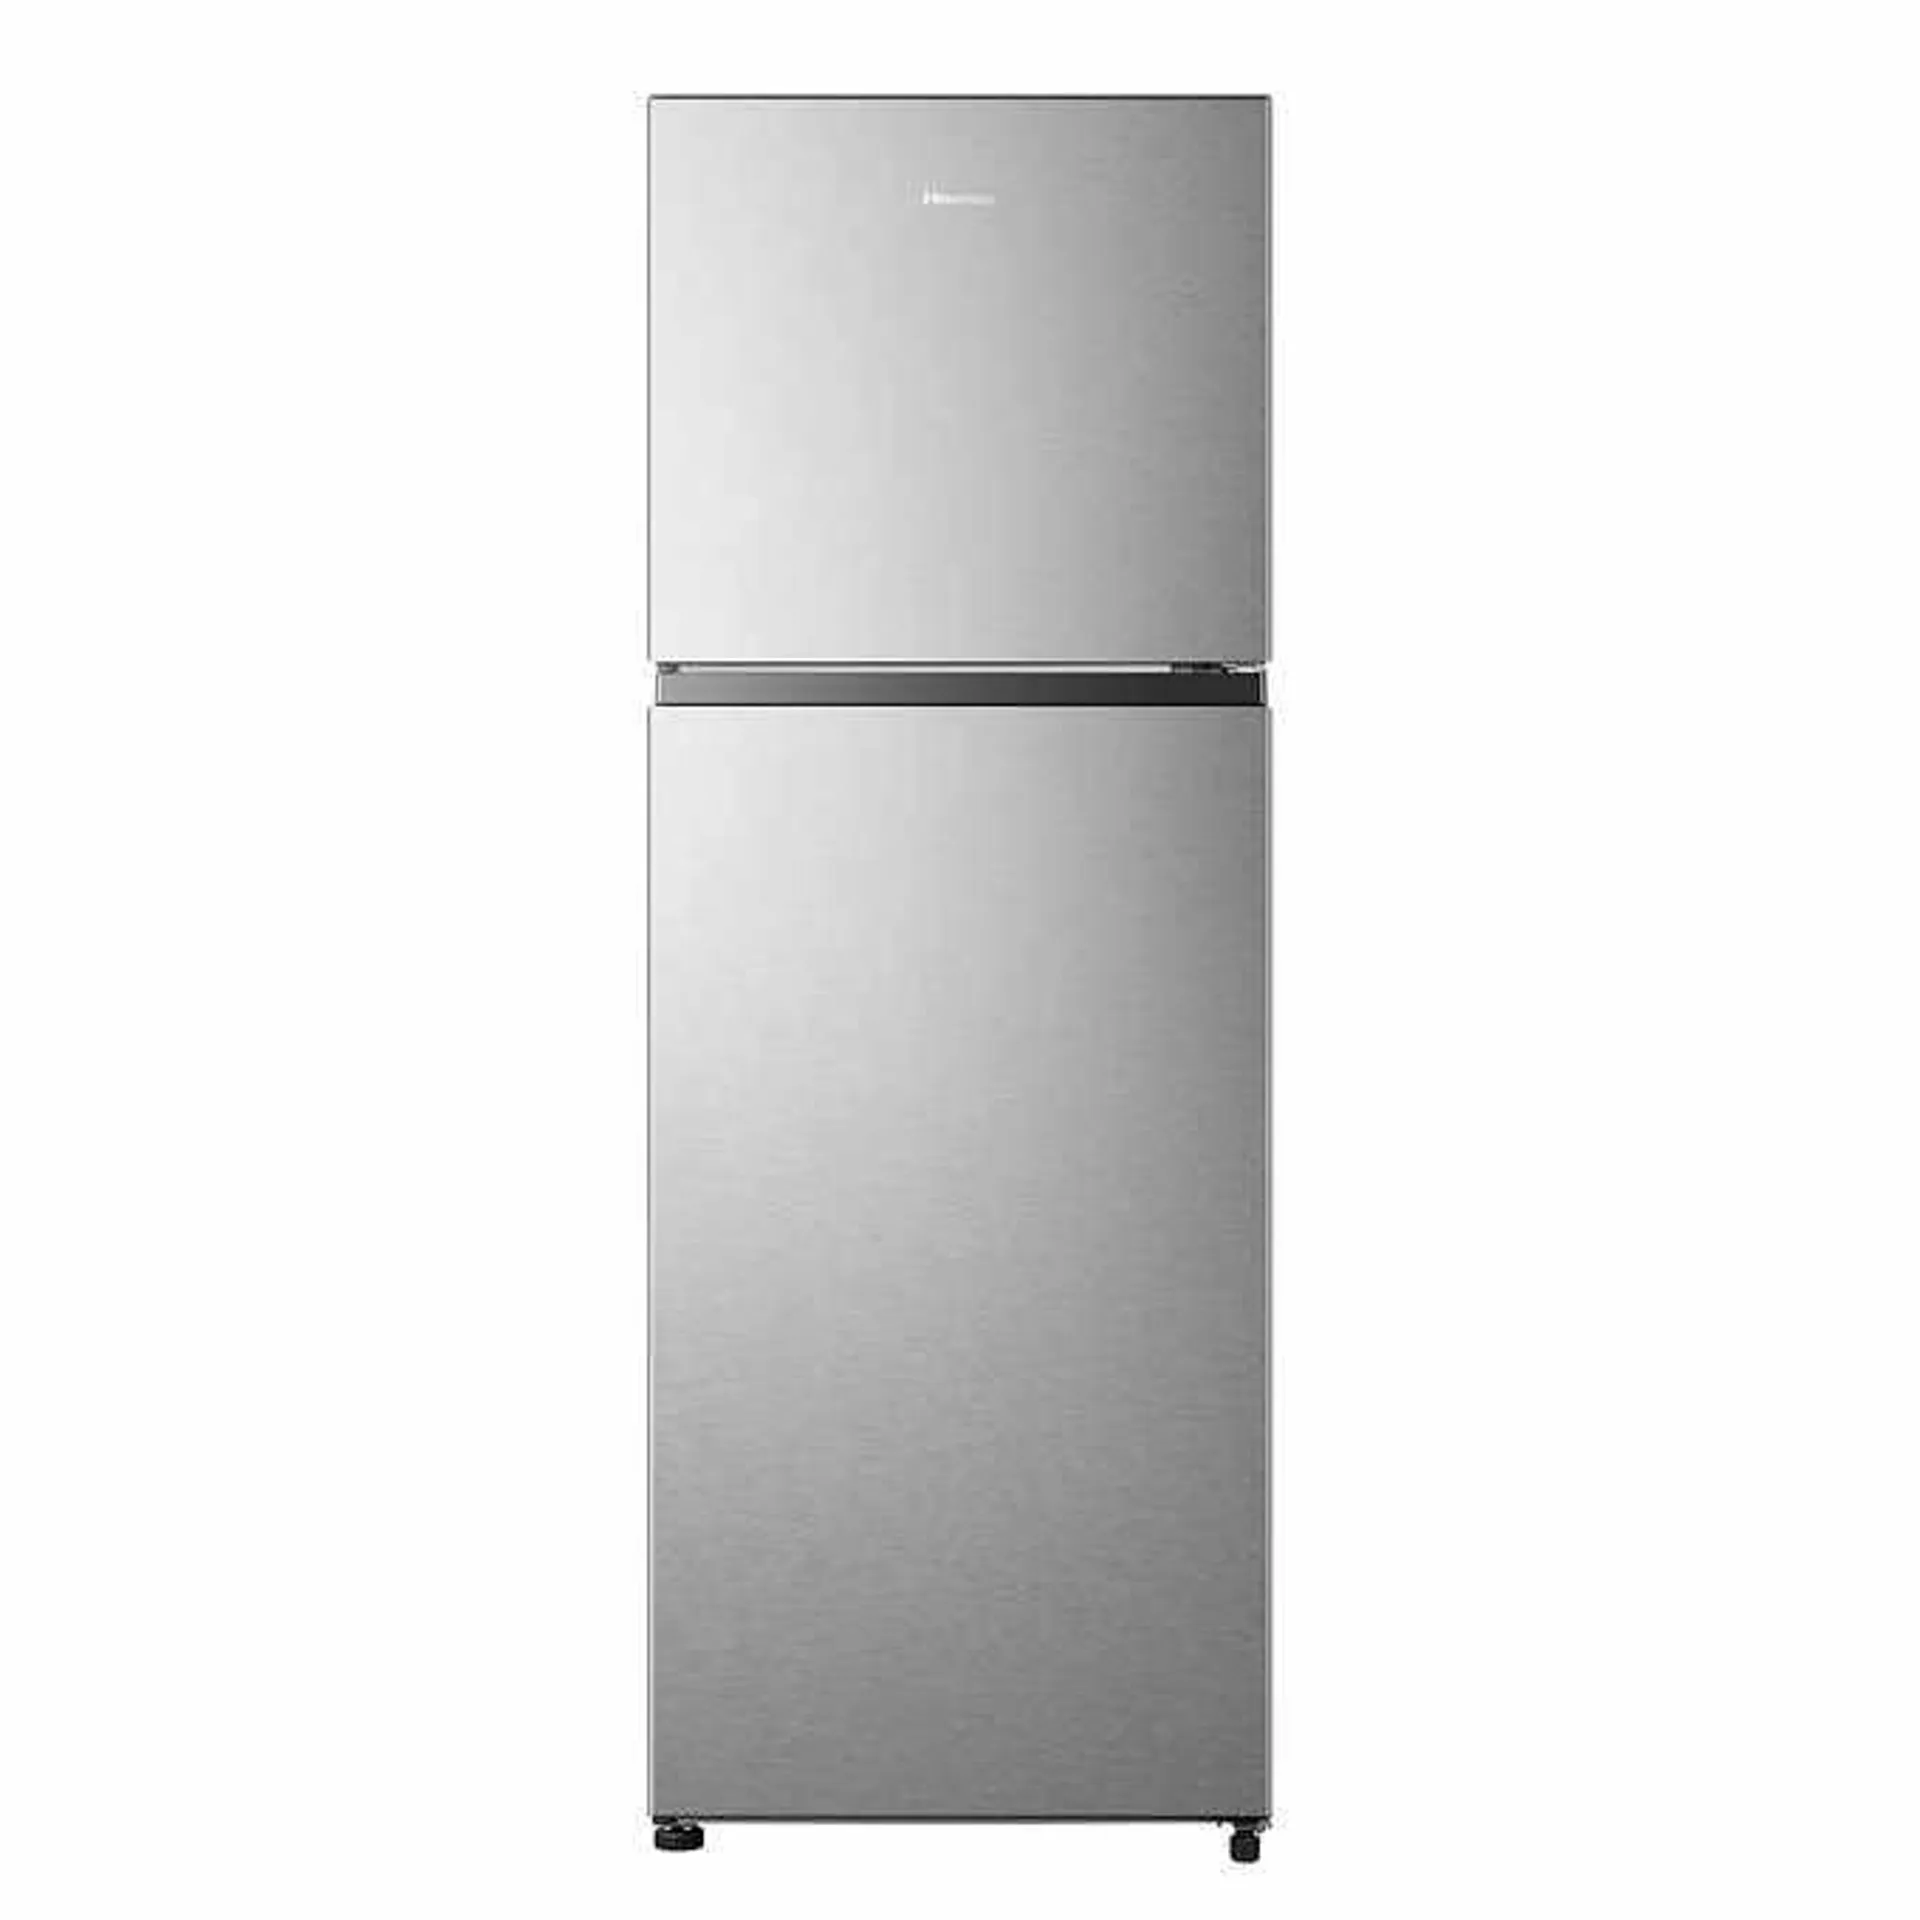 Hisense 24 in. 11.5 cu ft. Stainless Steel Top Mount Counter Depth Refrigerator with Recessed Handle